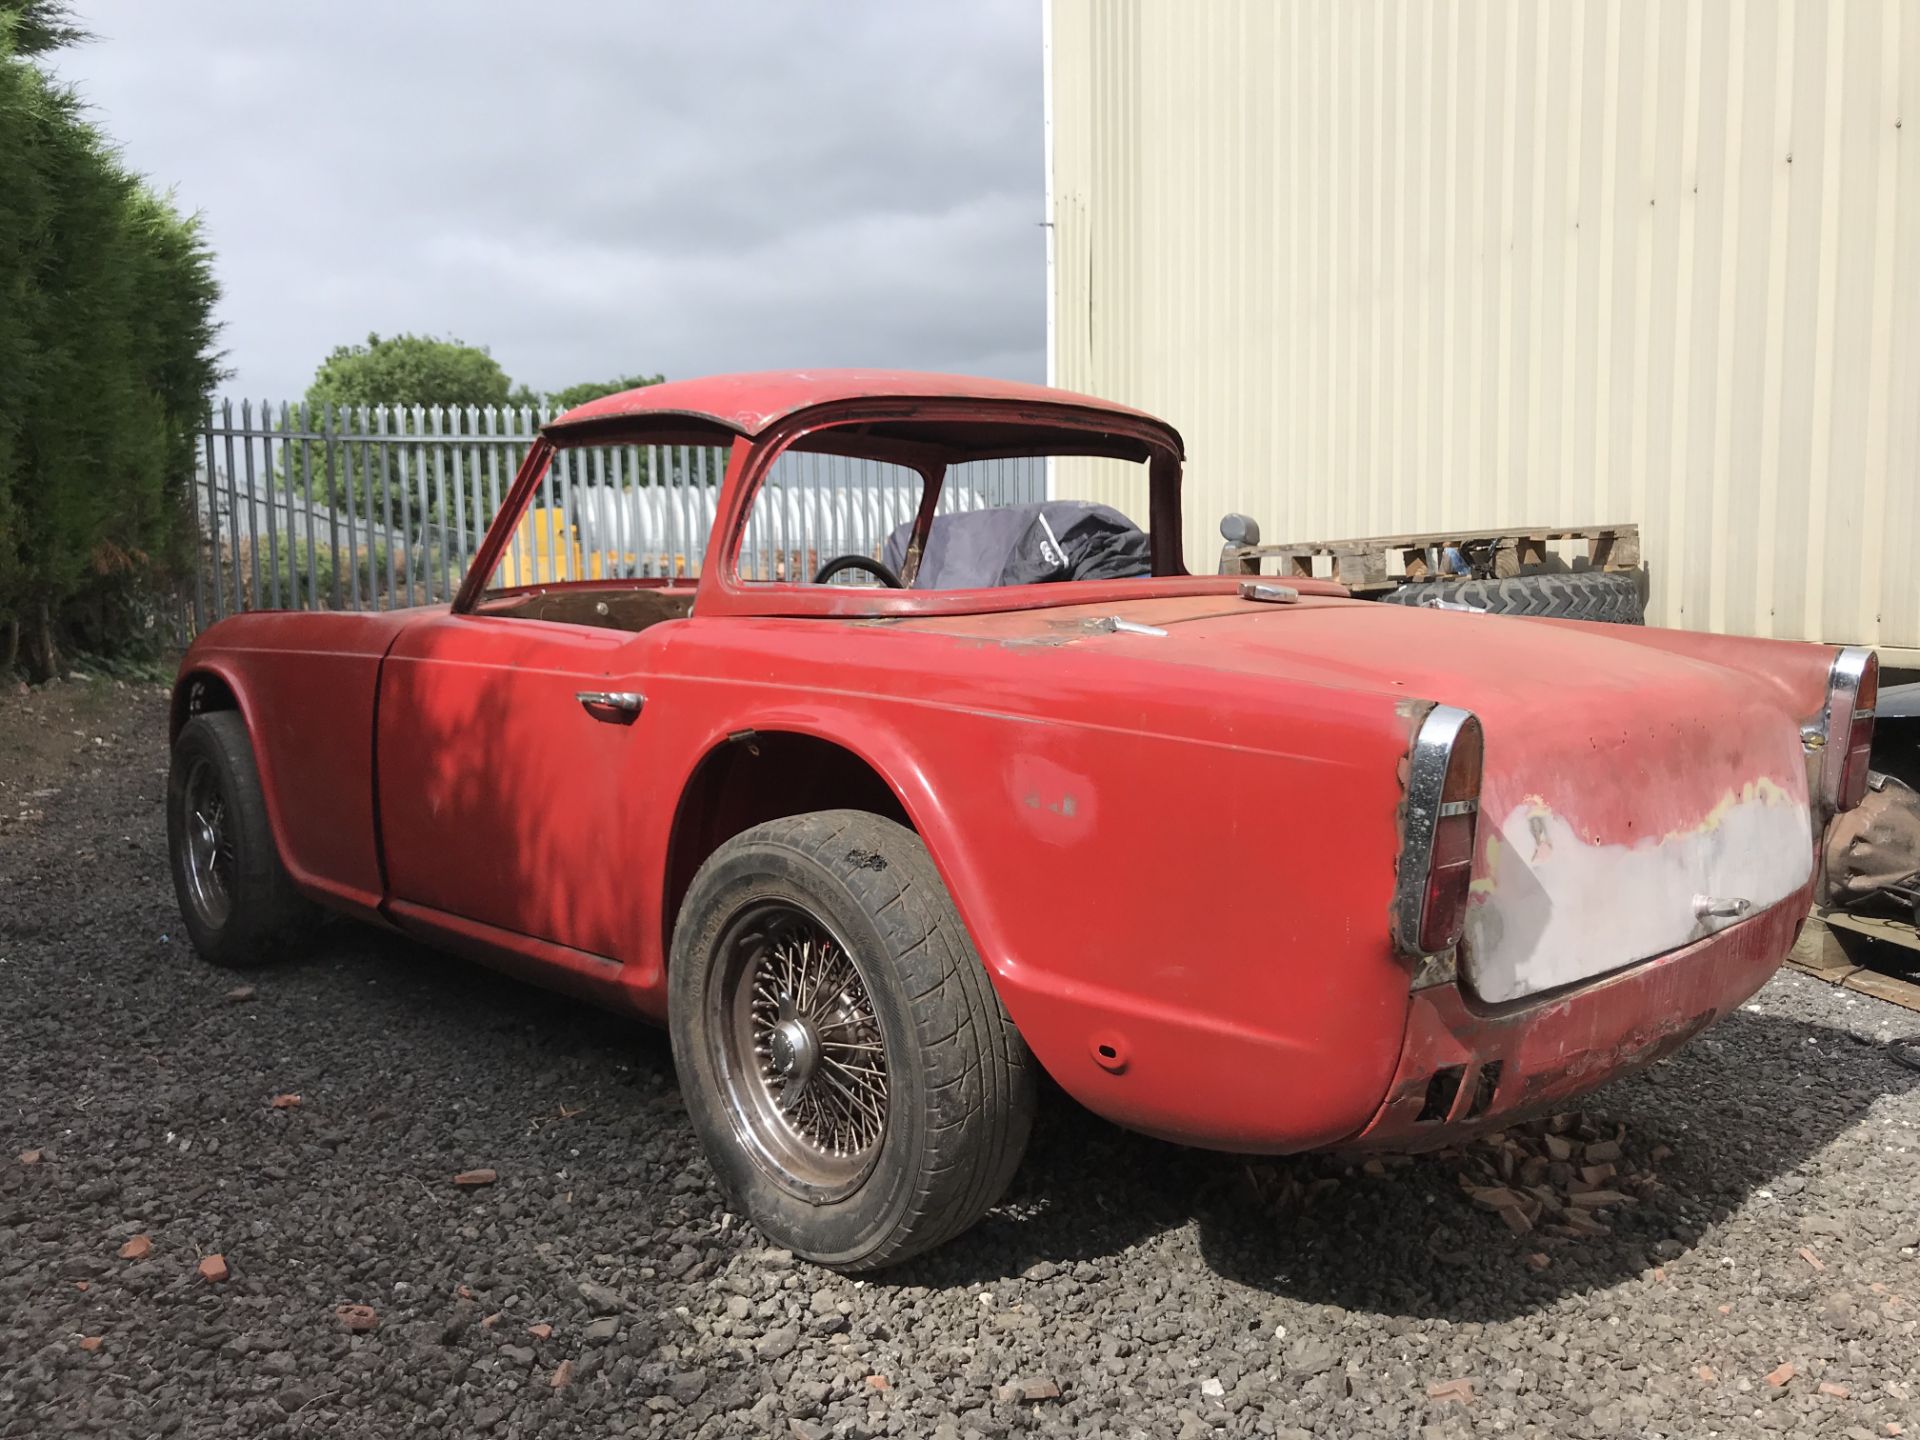 Triumph TR4 with Optional Hardtop - Image 38 of 64